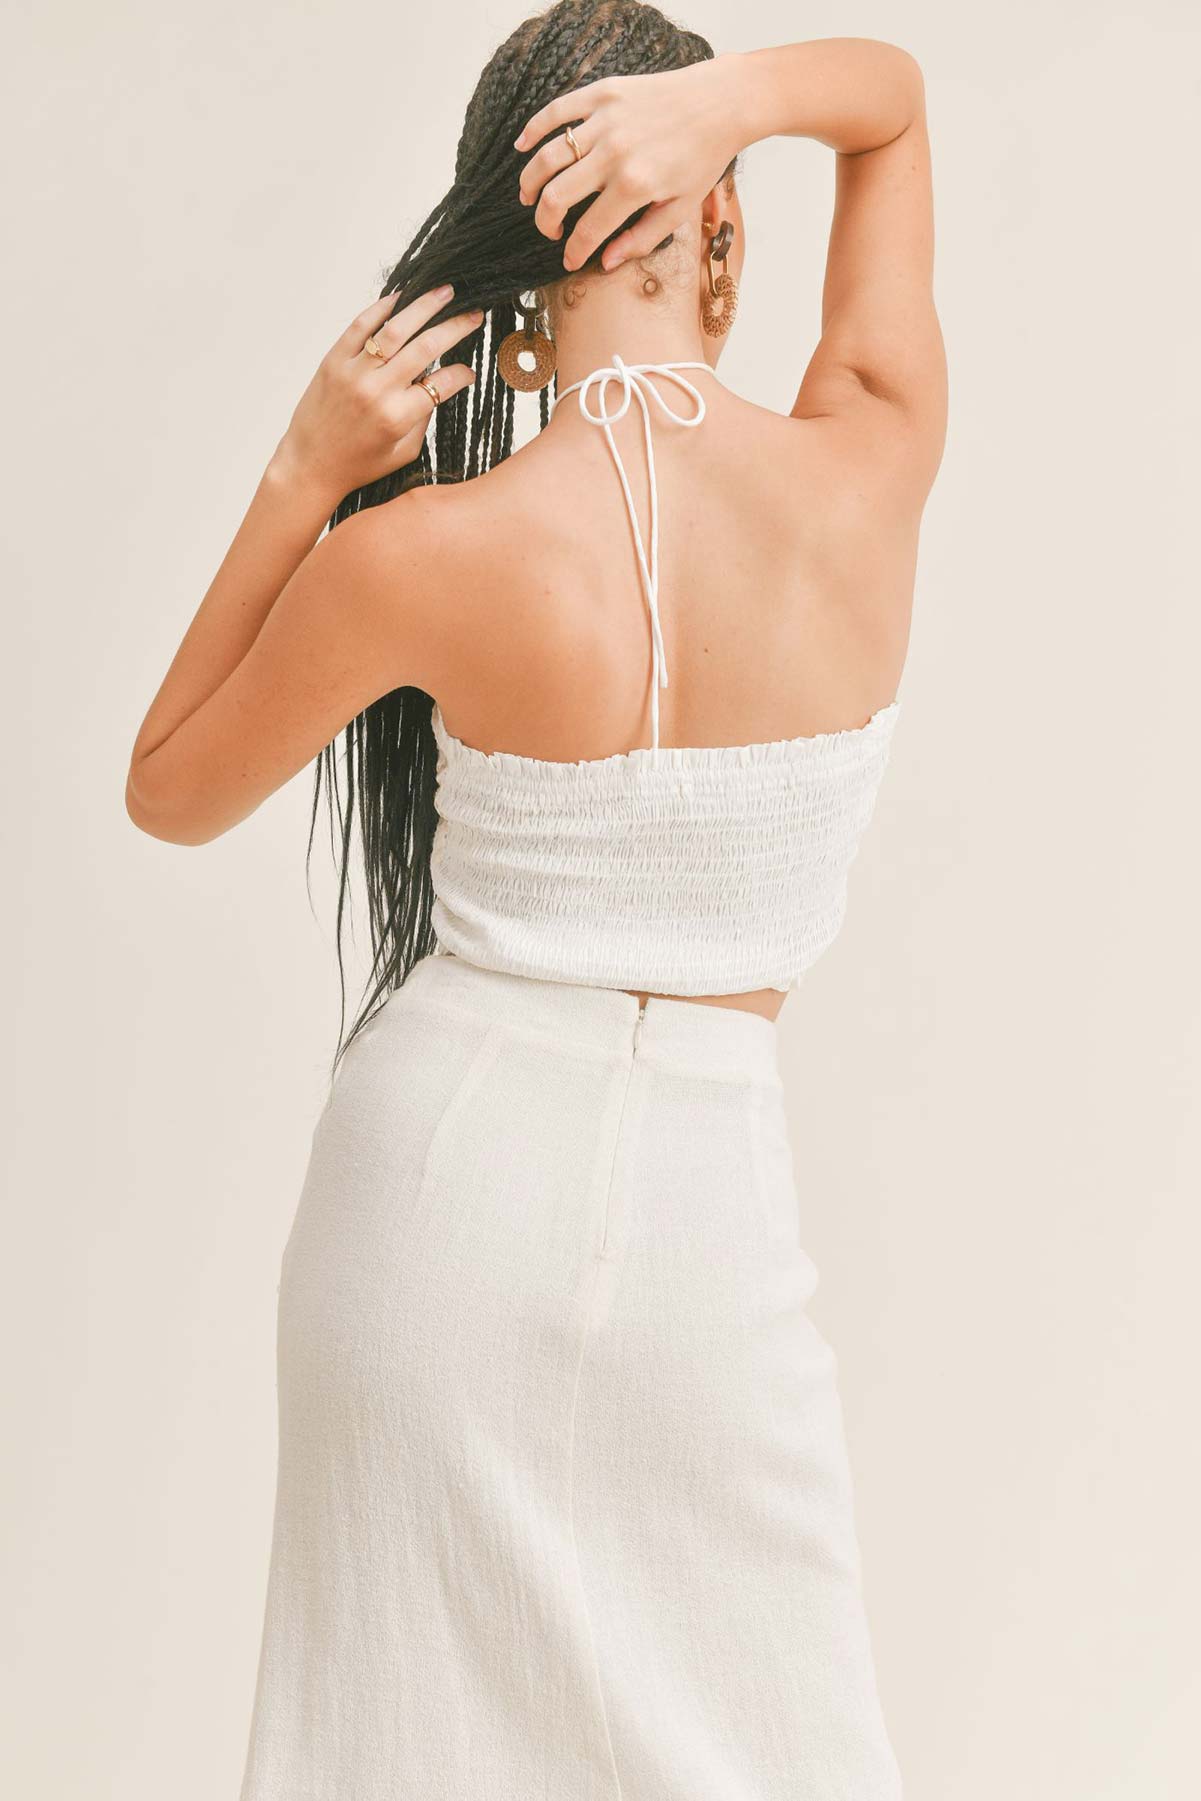 Sage the Label - Emmeline Lace Up Top - White Taupe - Back